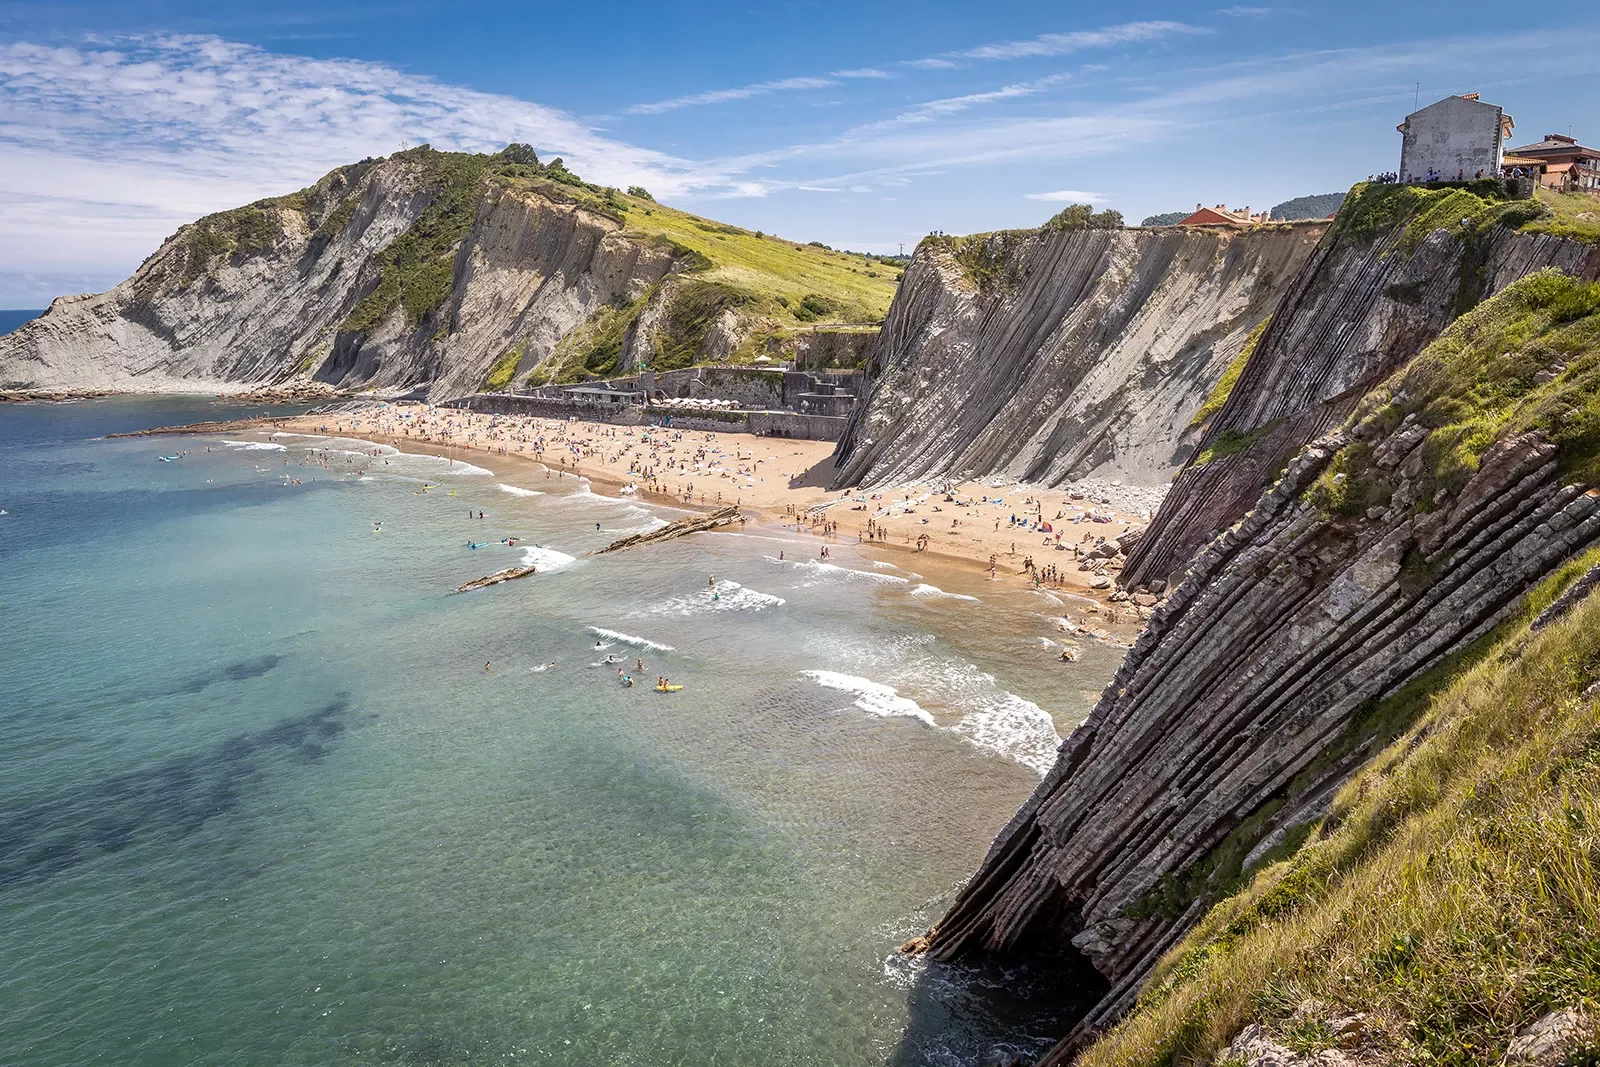 Shot of craggy cliffs, large, crowded beach in distance.